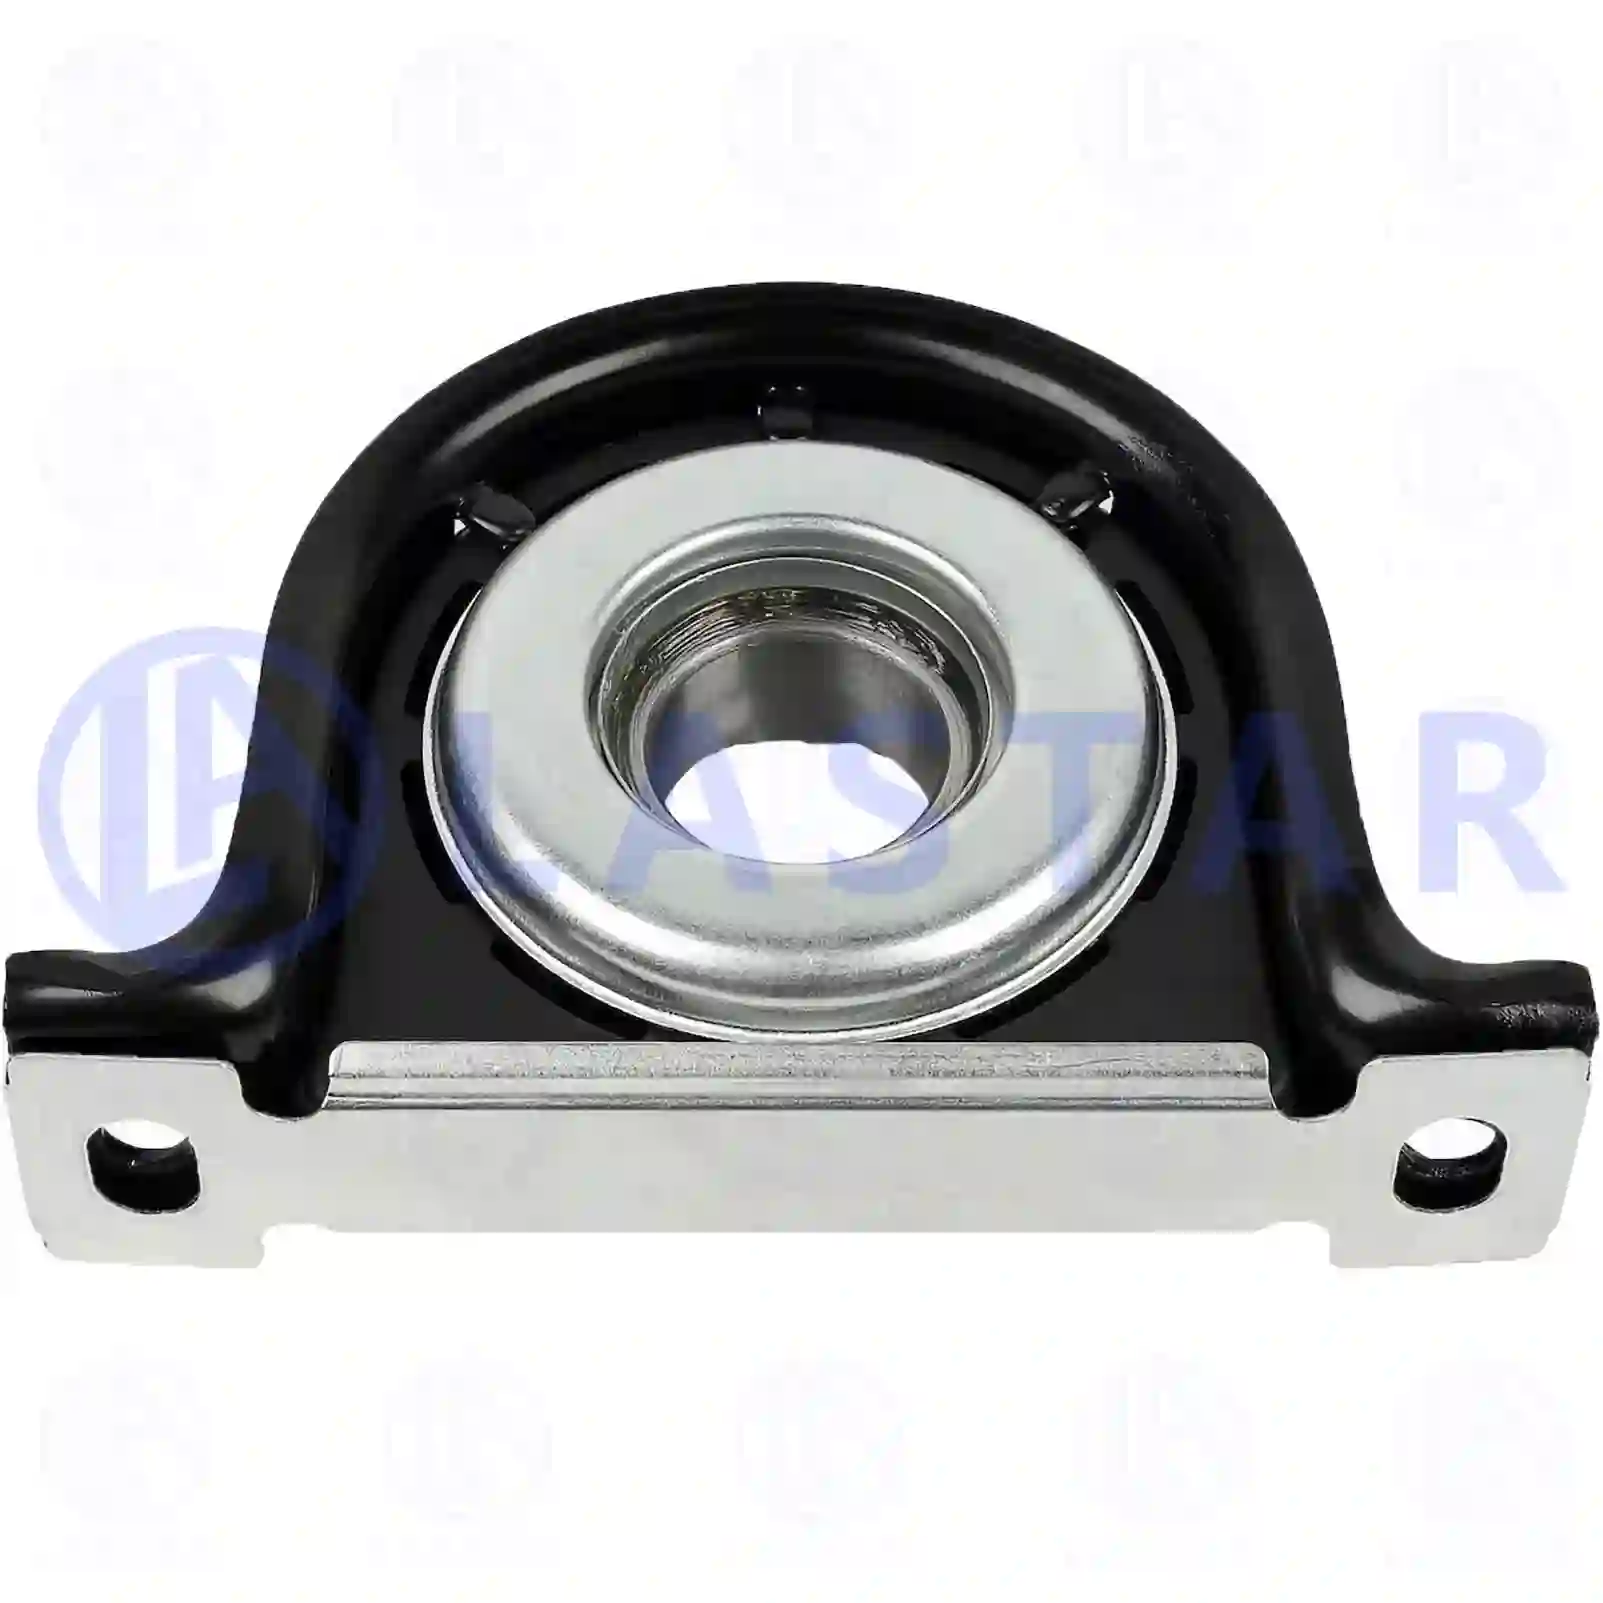 Support Bearing Center bearing, la no: 77734328 ,  oem no:93158251, 5000287986, ZG02498-0008 Lastar Spare Part | Truck Spare Parts, Auotomotive Spare Parts